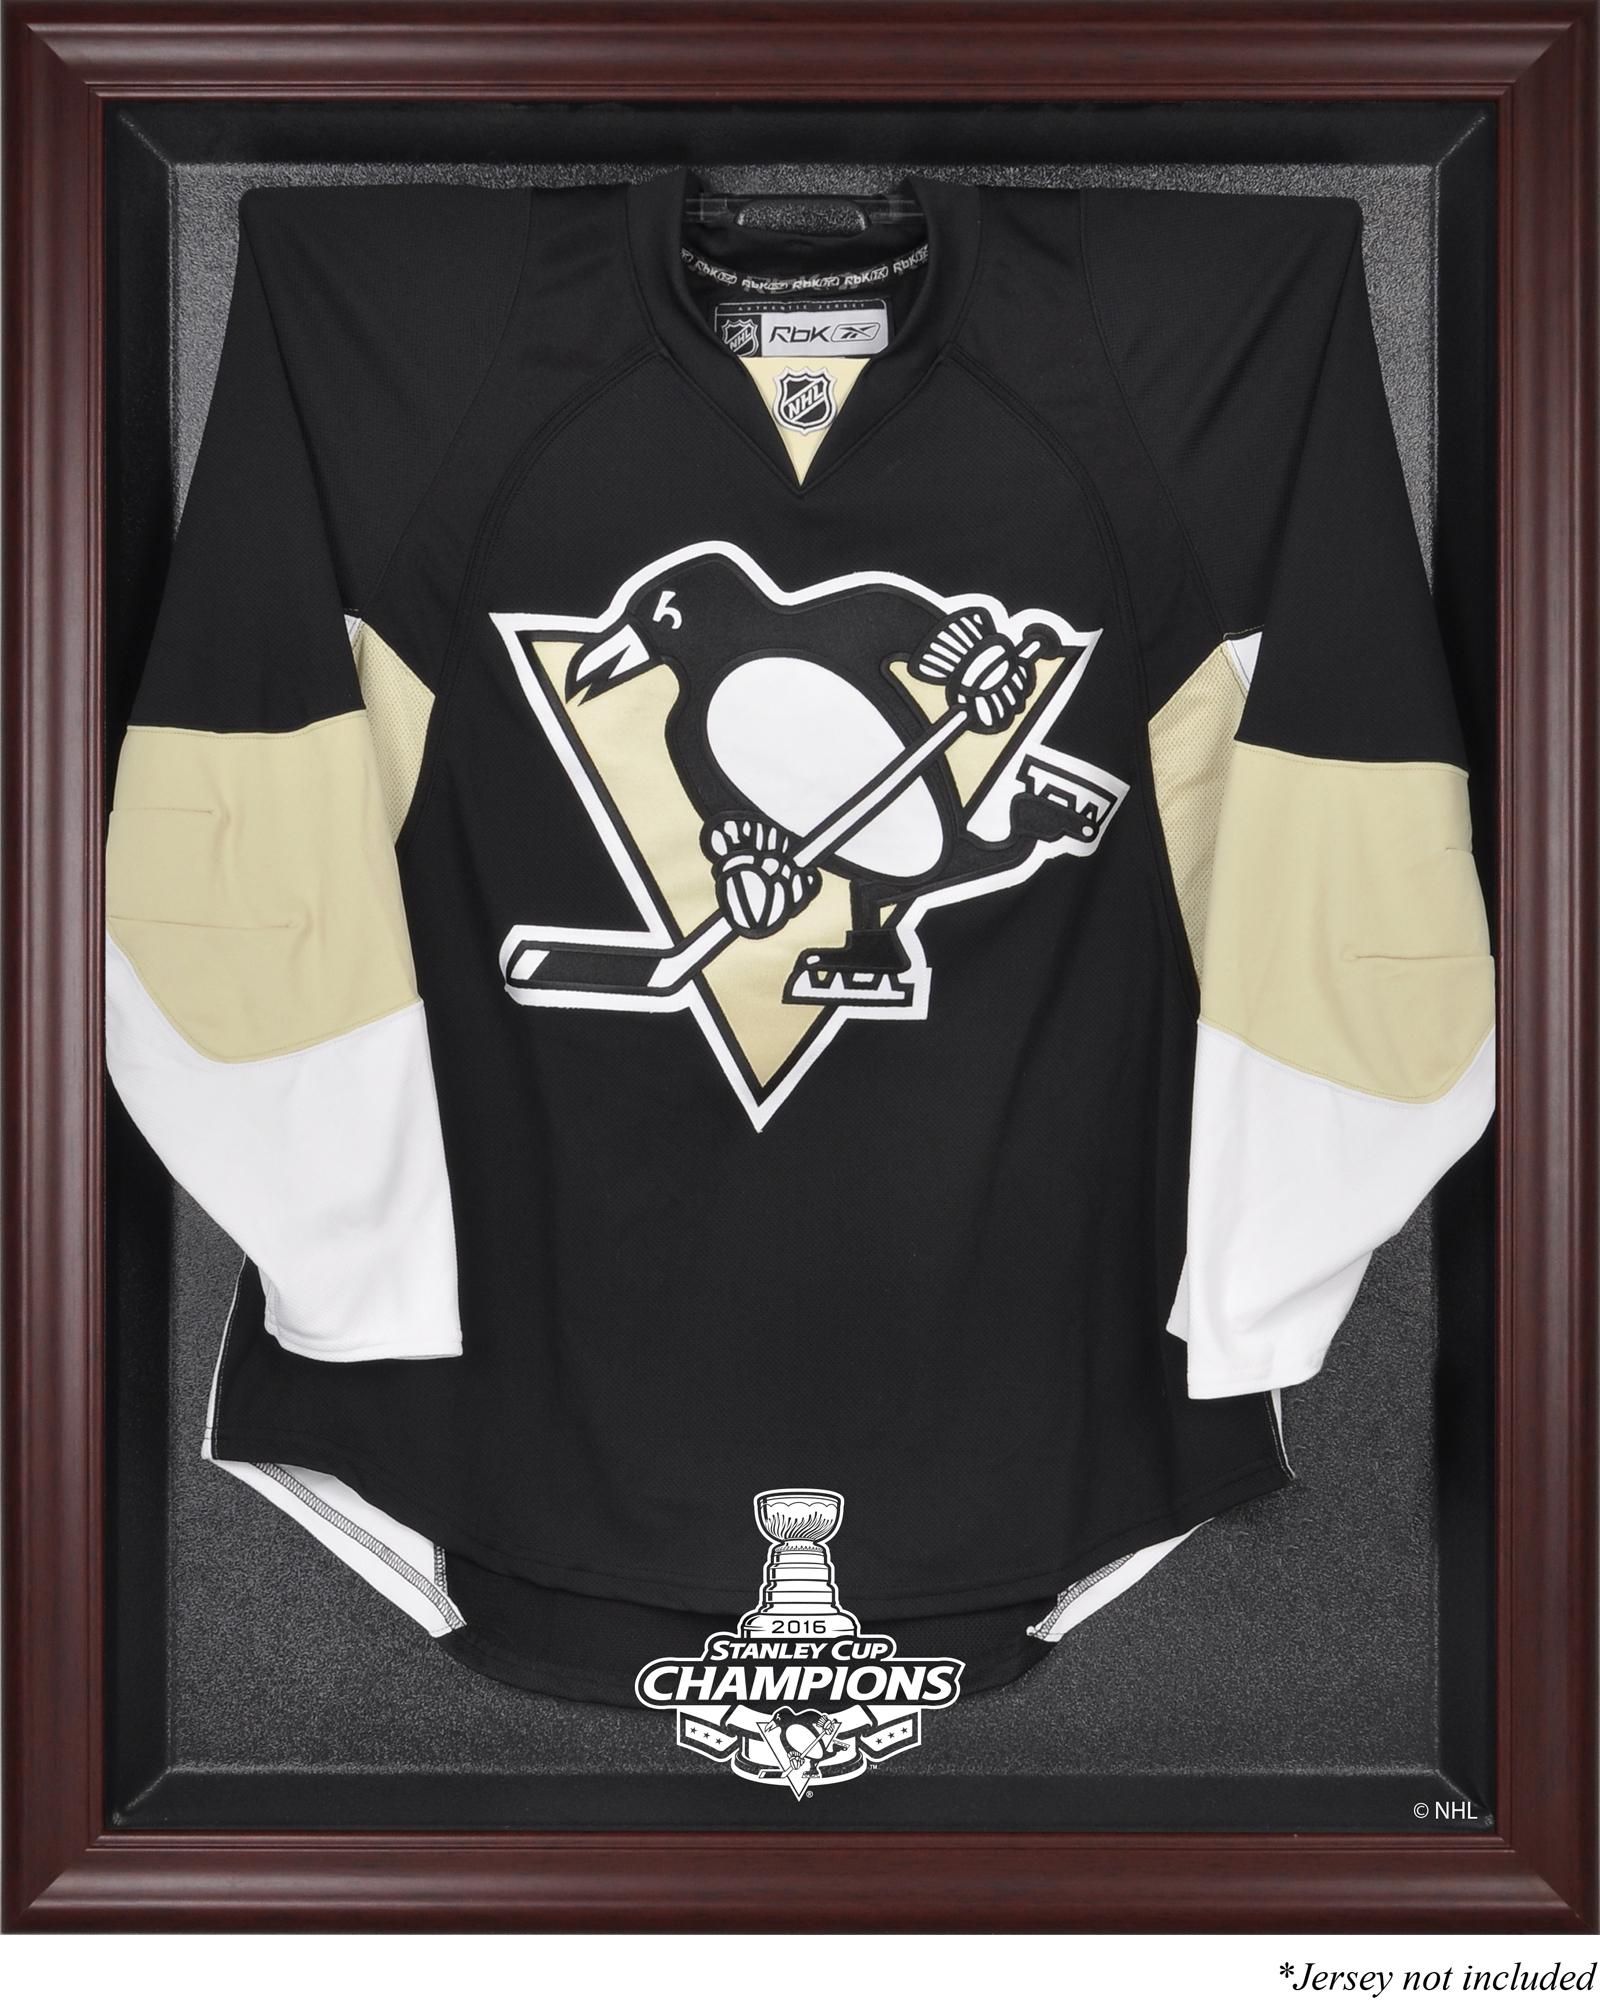 pittsburgh penguins 2016 stanley cup jersey